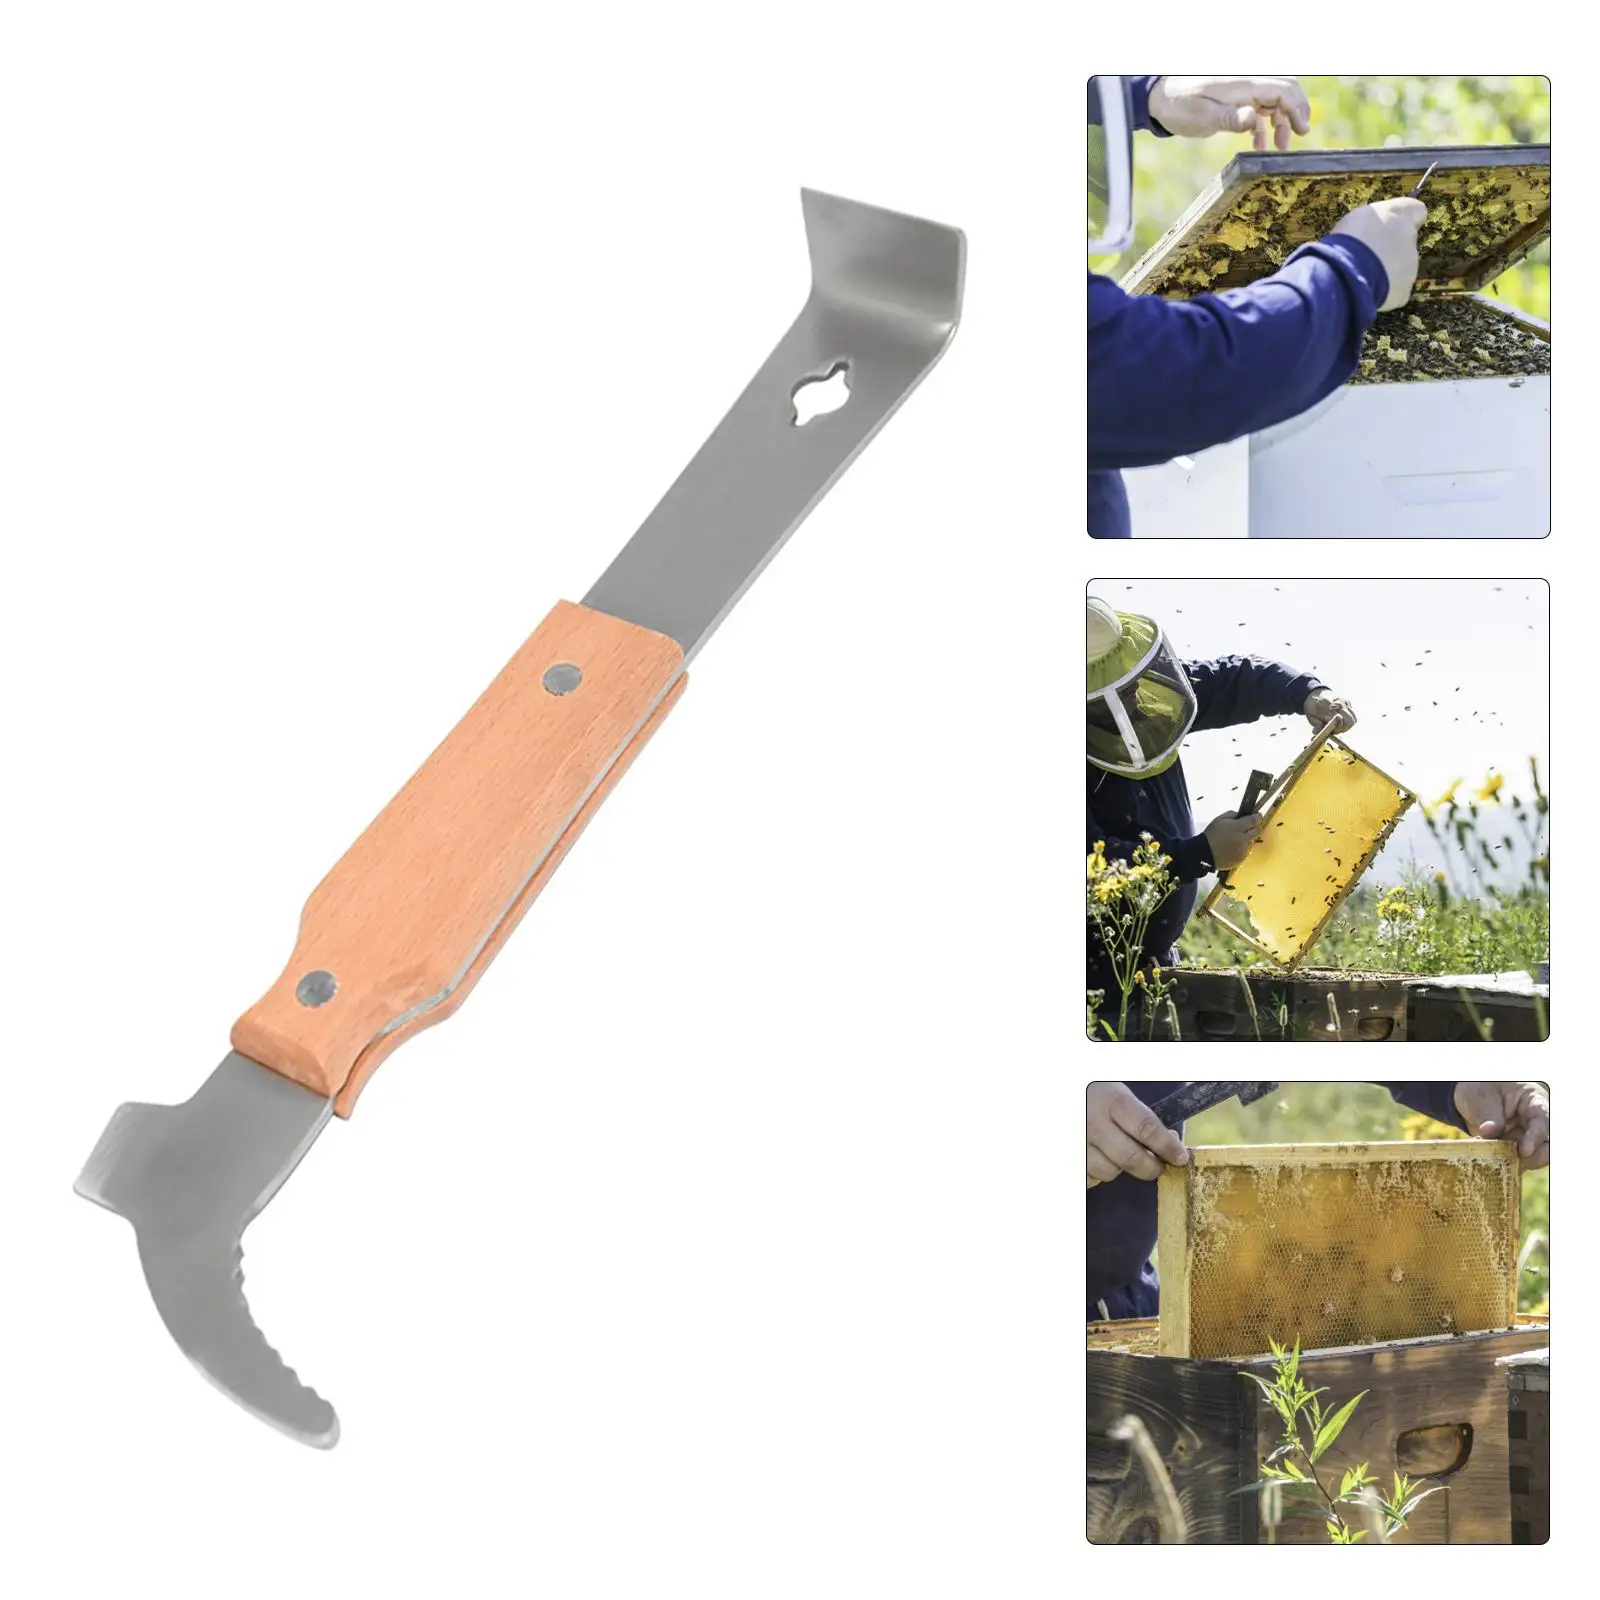 Bee Hive Scraper Bee Hive Tool for Beekeeping Equipment Apiculture Uncapping